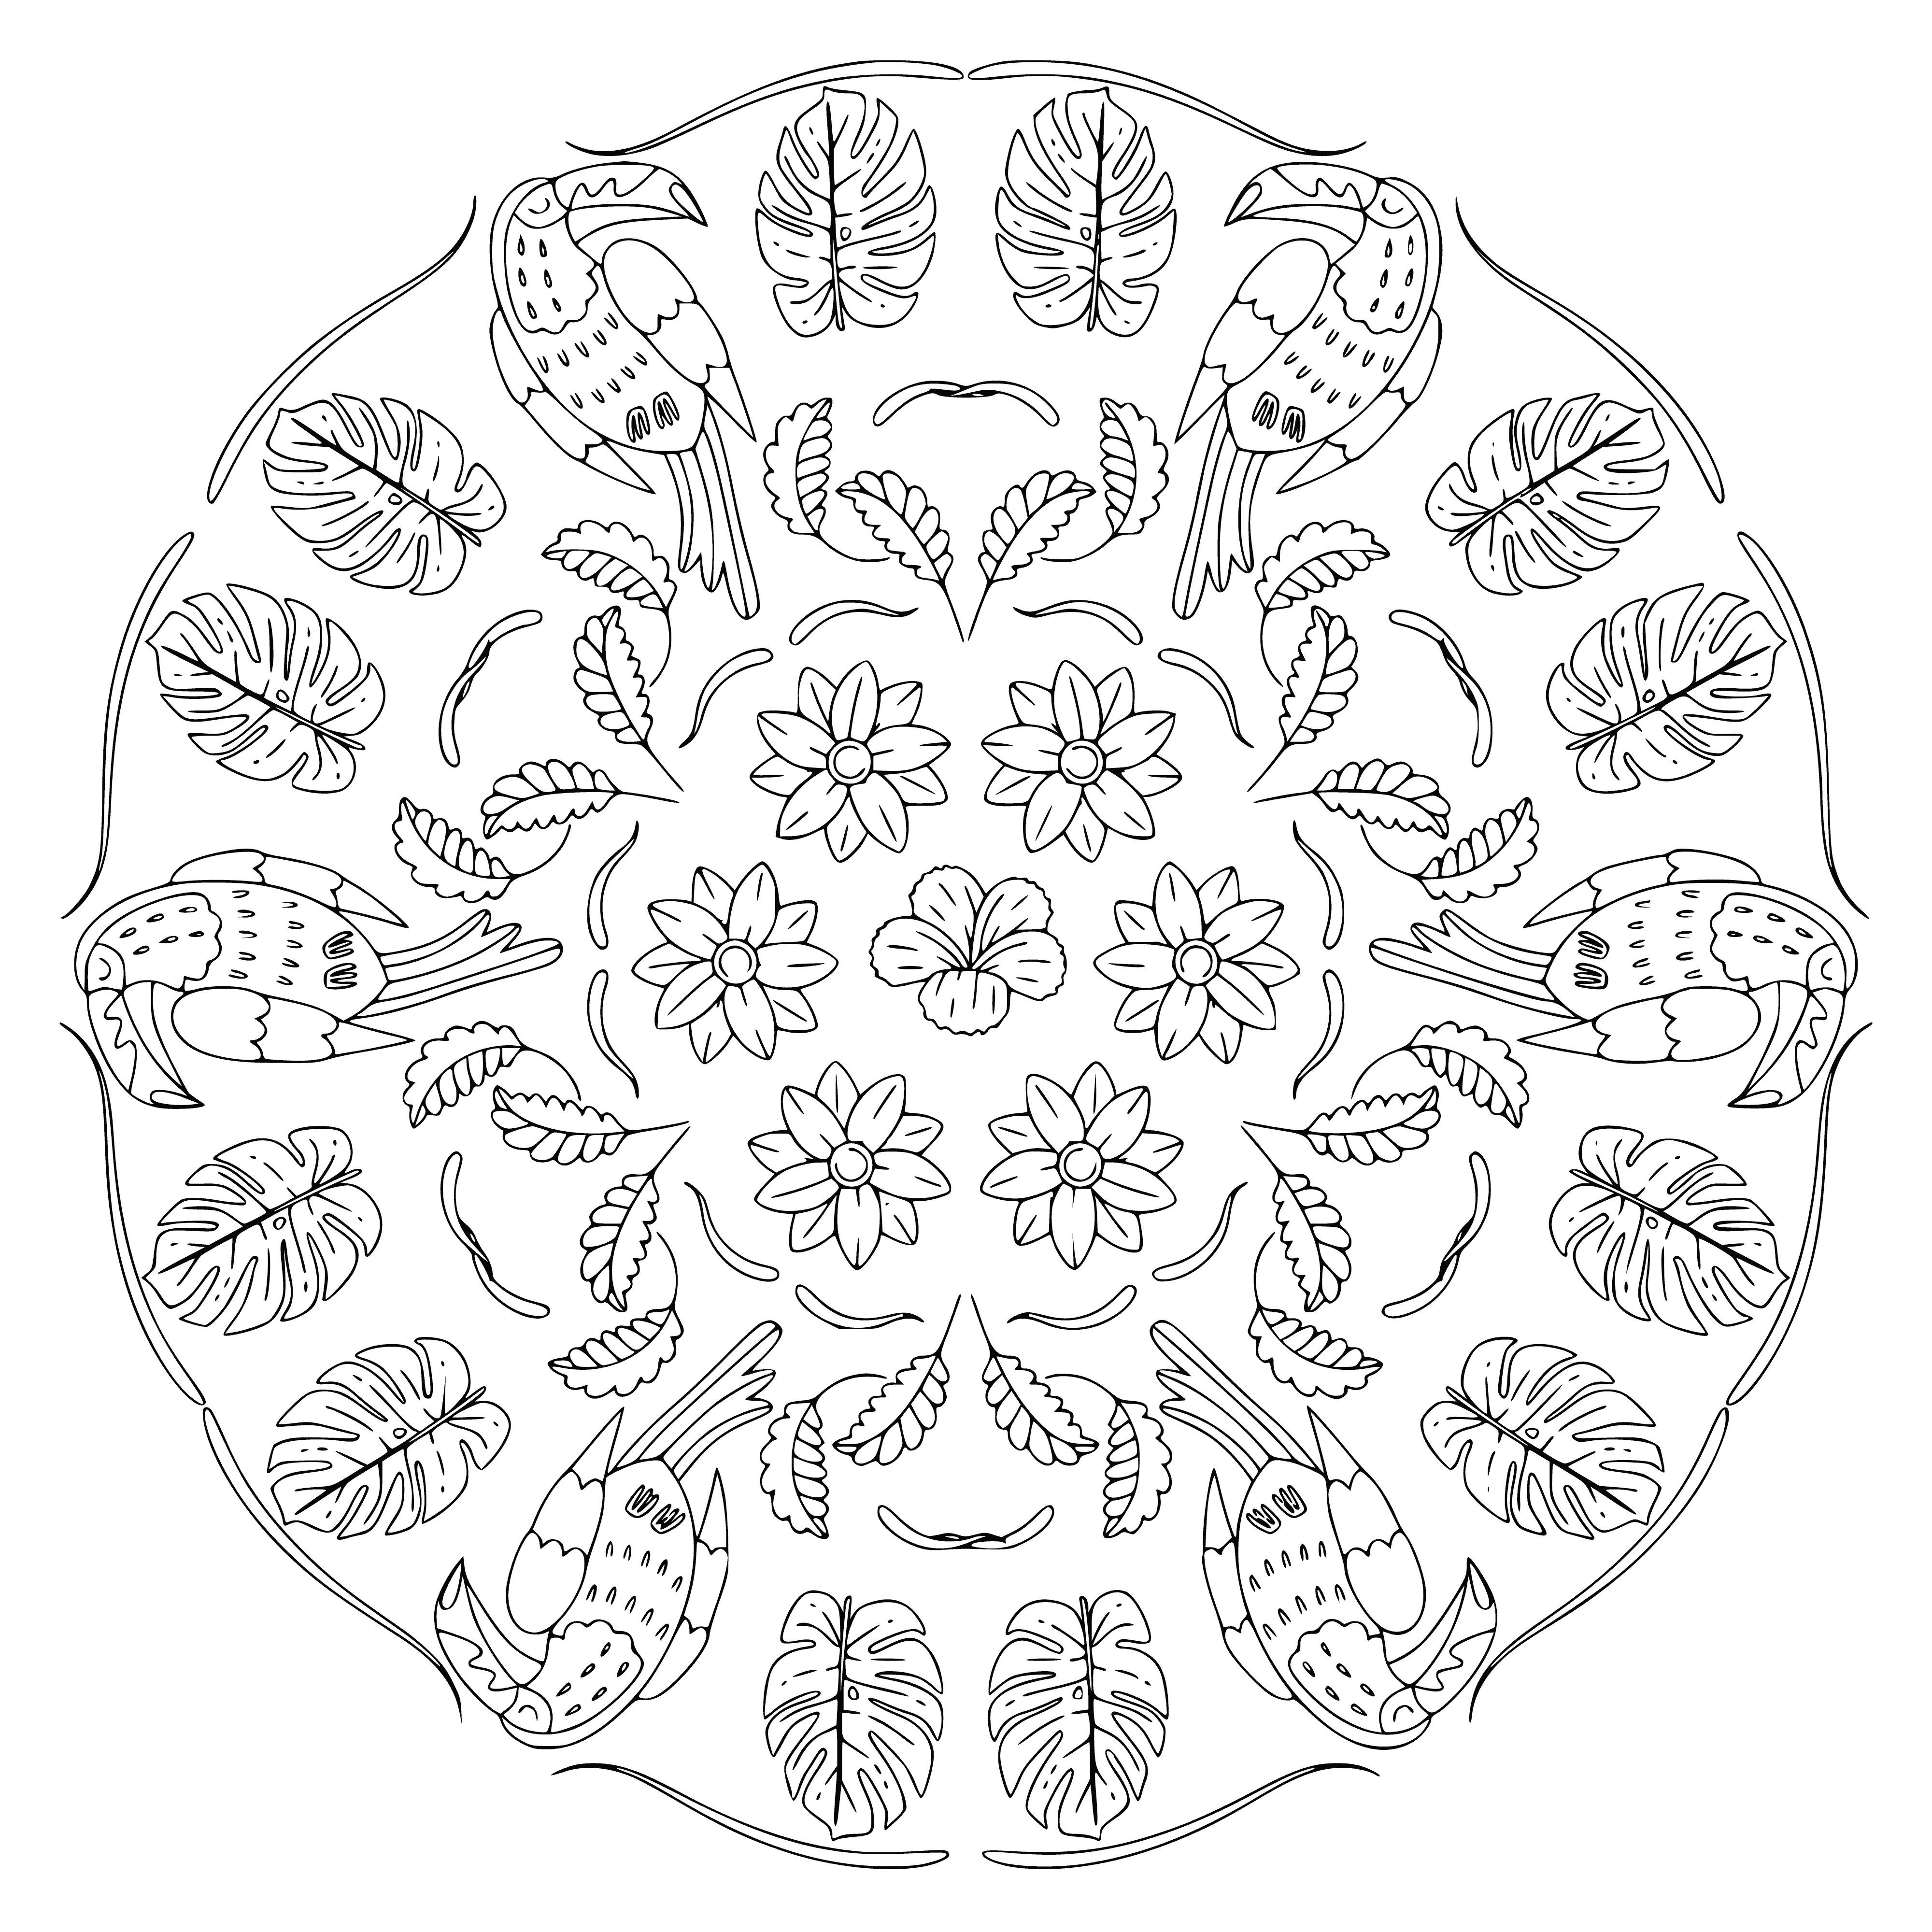 coloring page: Mandalad w/ two birds in the center; light blue & green swirls w/ flowers in white, yellow & orange around the edge.